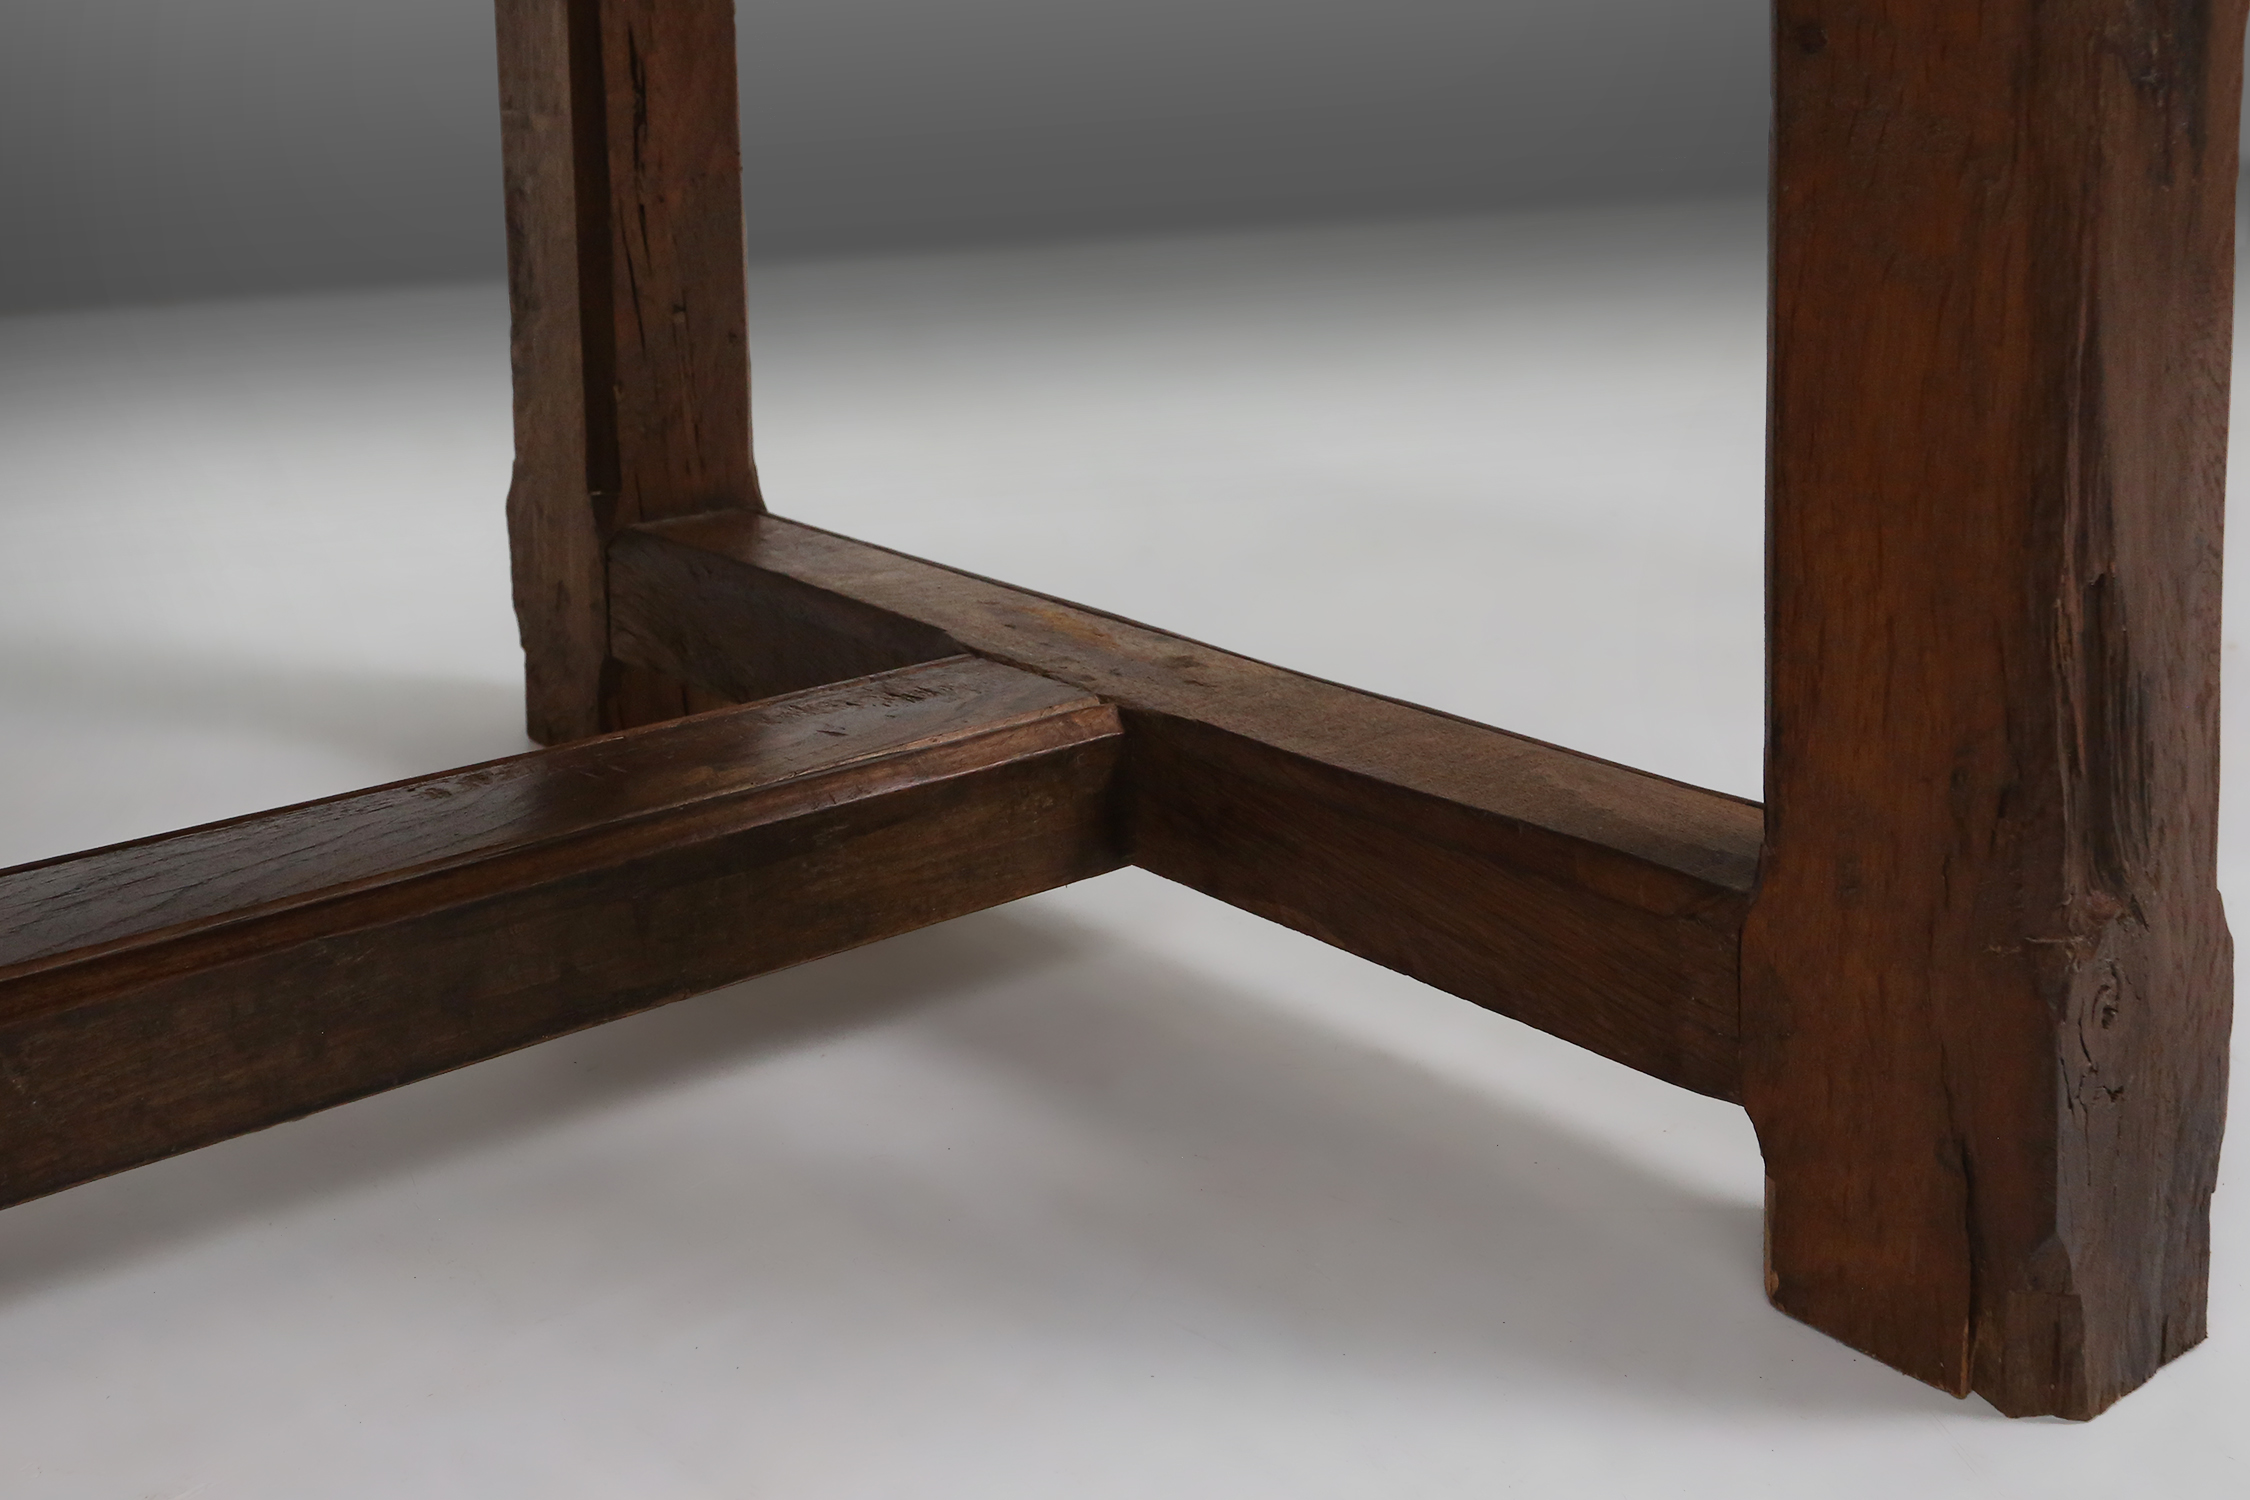 Antique Spanish Console Table in Oak, 18th Centurythumbnail